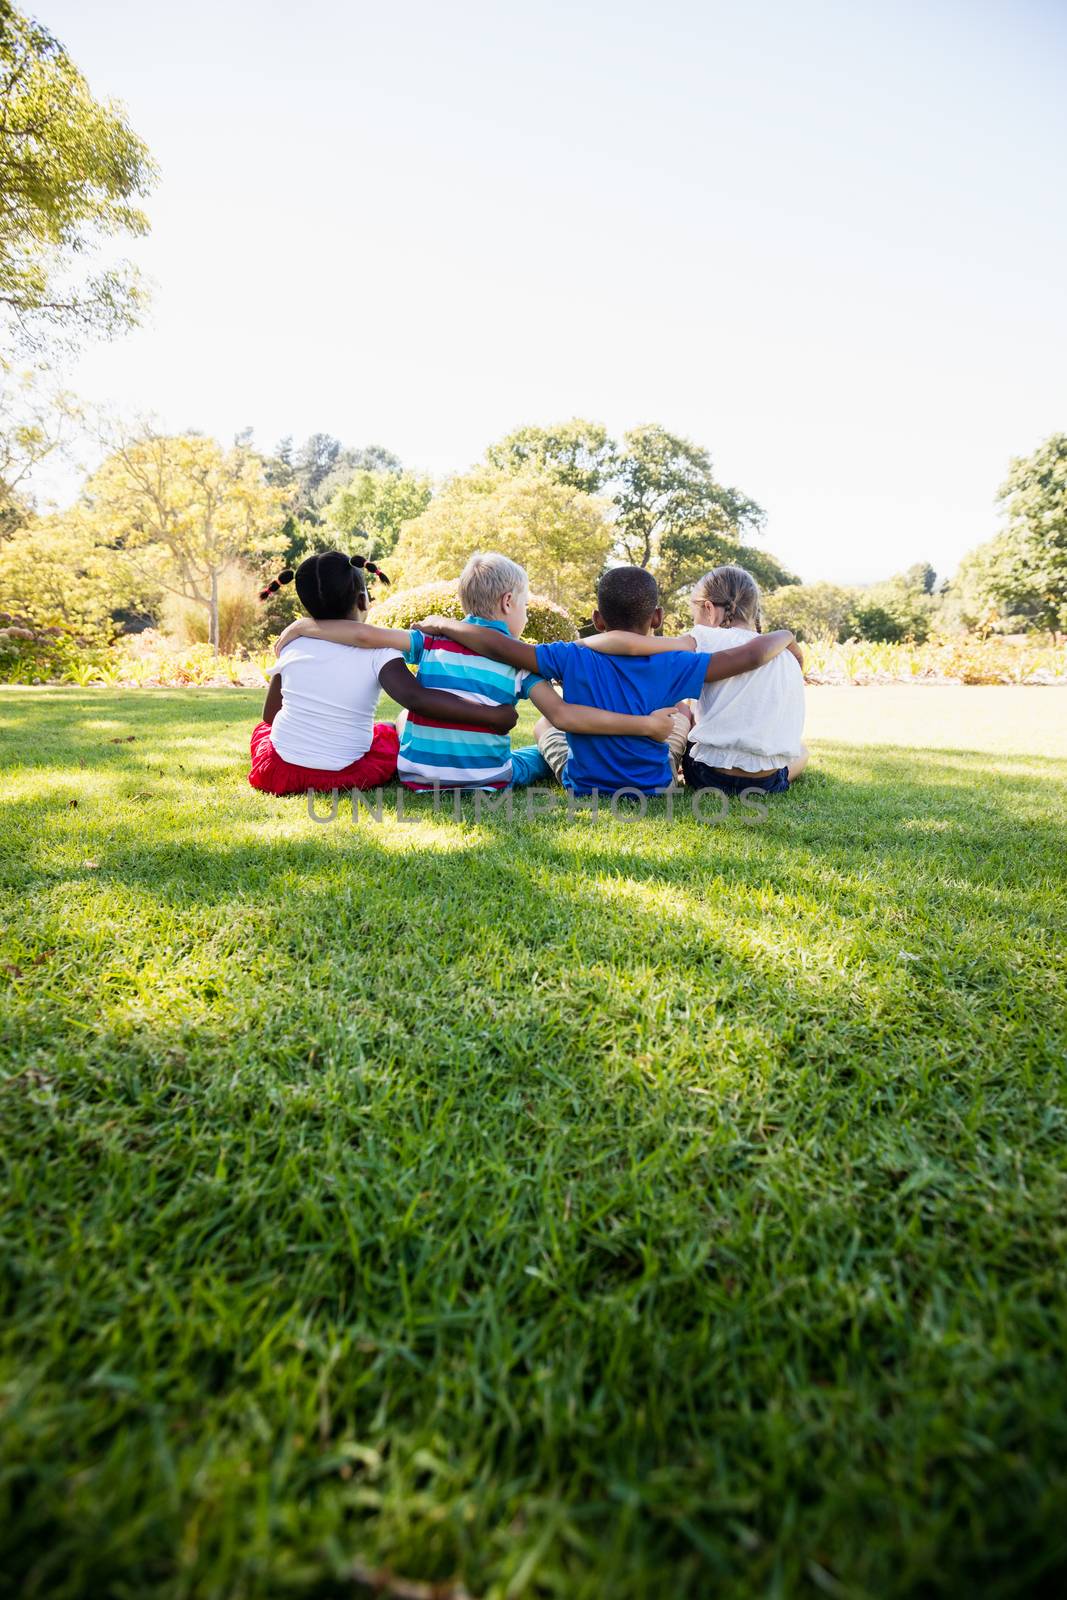 Kids are sitting on the grass together during a sunny day by Wavebreakmedia